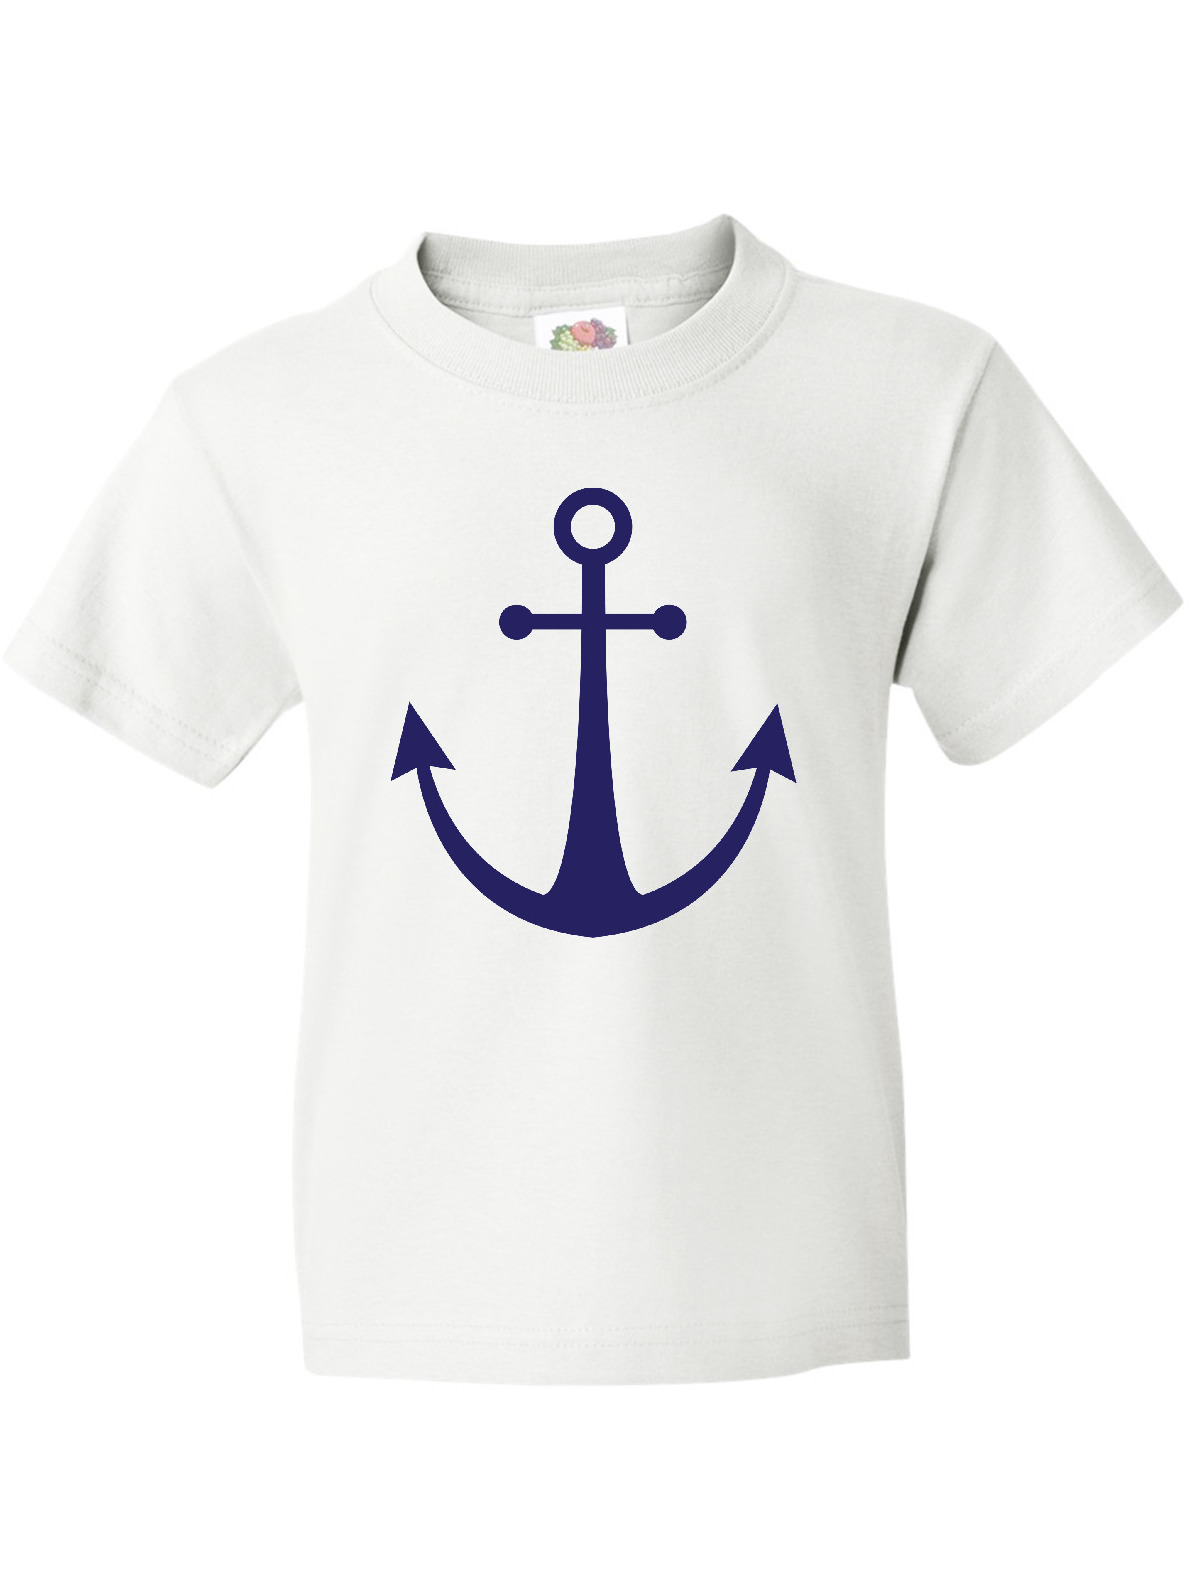 Inktastic Anchor Nautical Youth T-Shirt - image 1 of 4